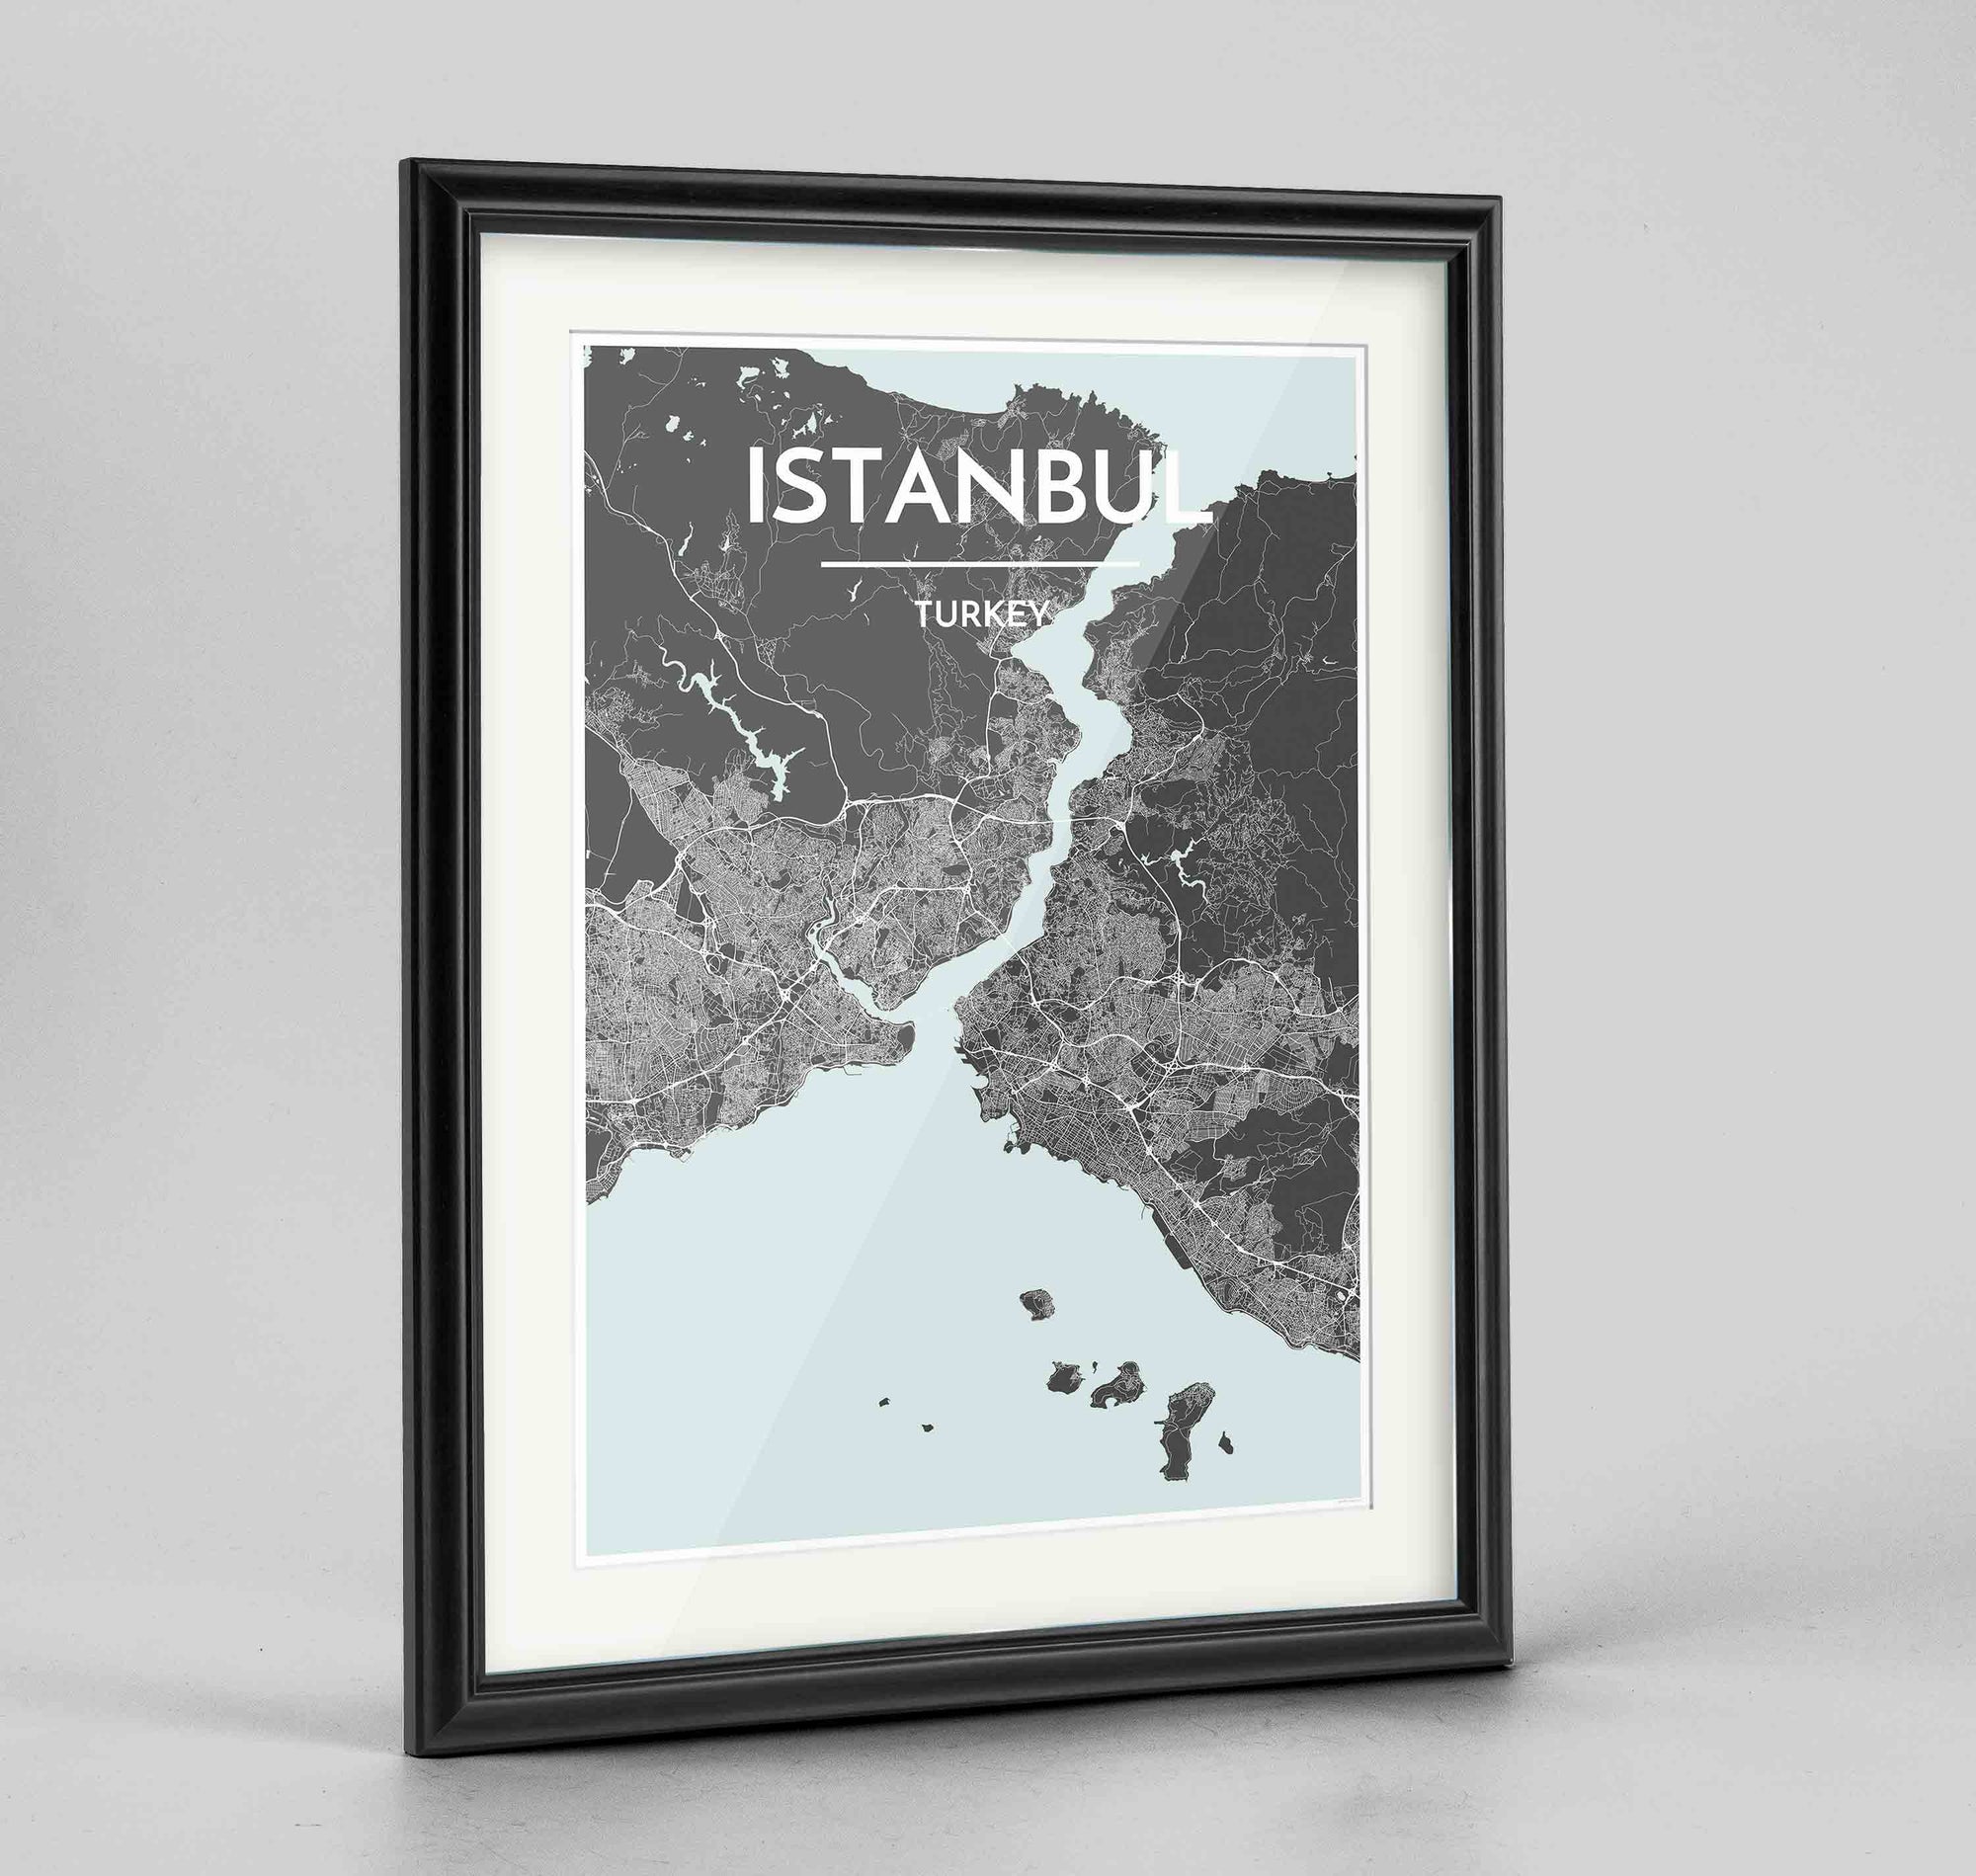 Framed Istanbul Map Art Print 24x36" Traditional Black frame Point Two Design Group